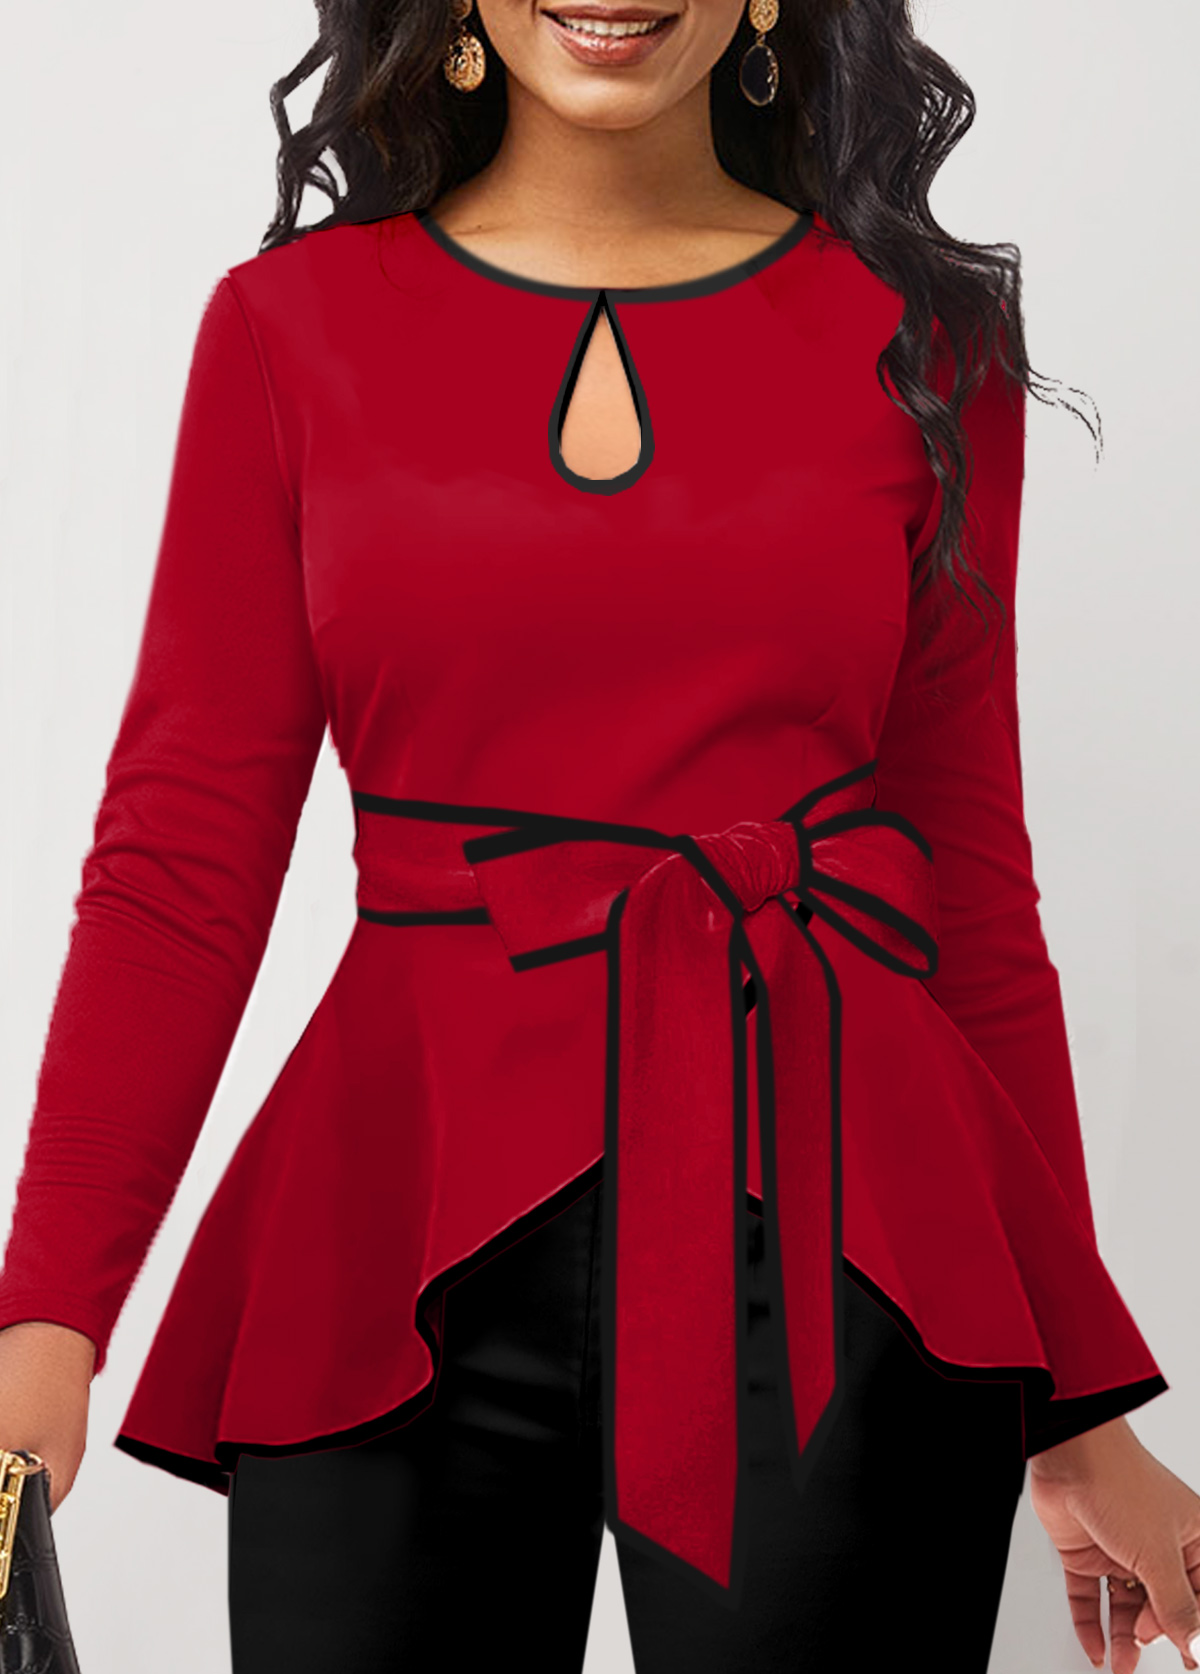 Contrast Binding Belted Red Round Neck T Shirt